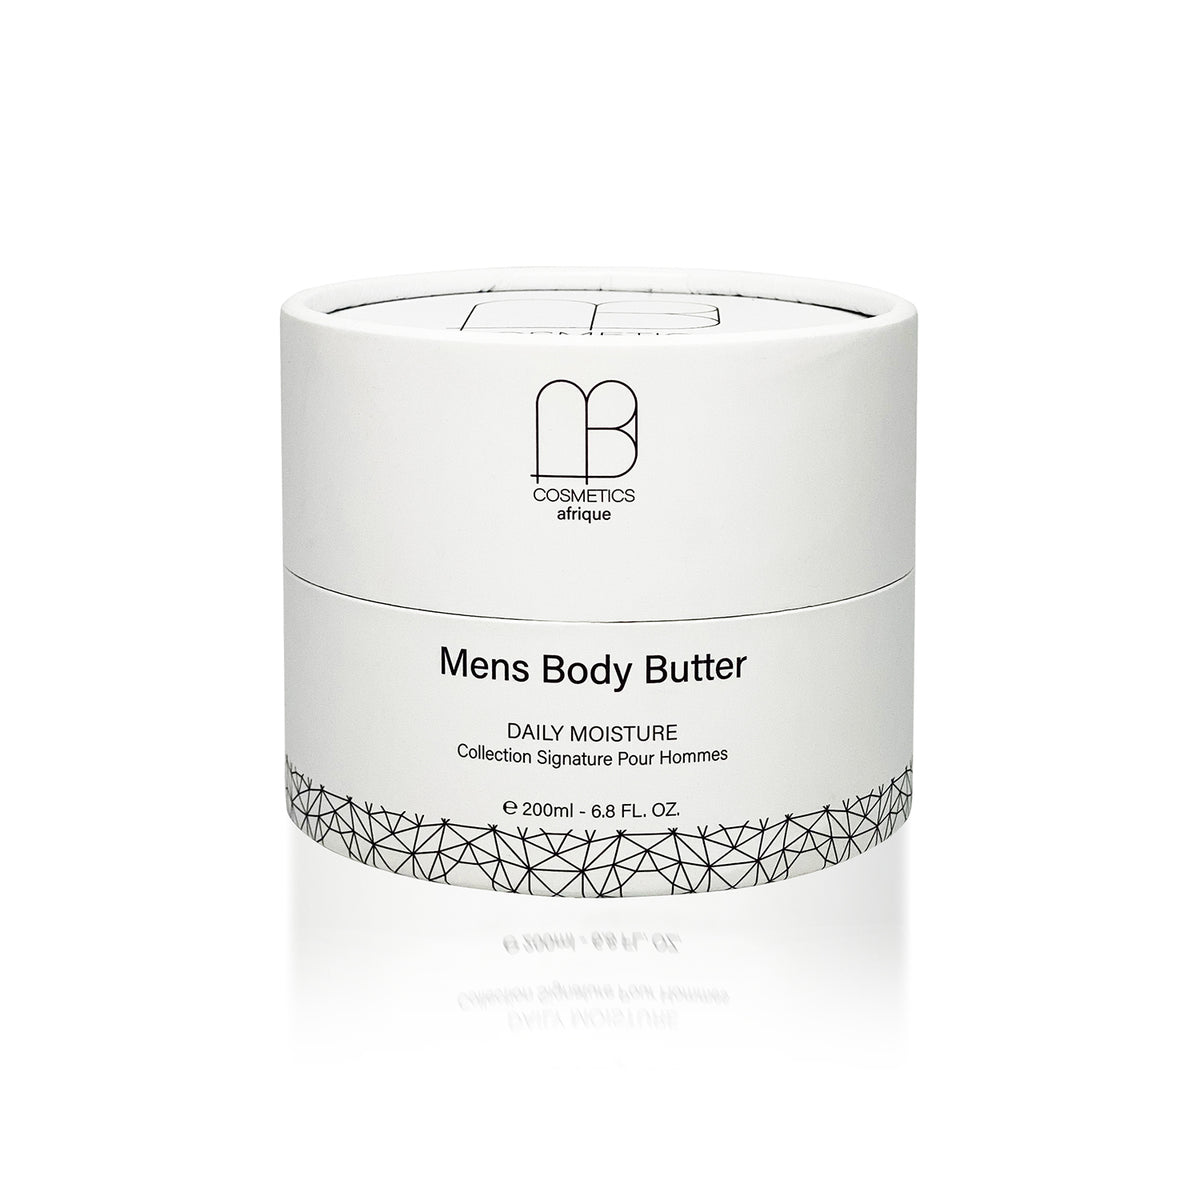 Mens Body Butter - Collection Signature pour Hommes - Daily Moisture